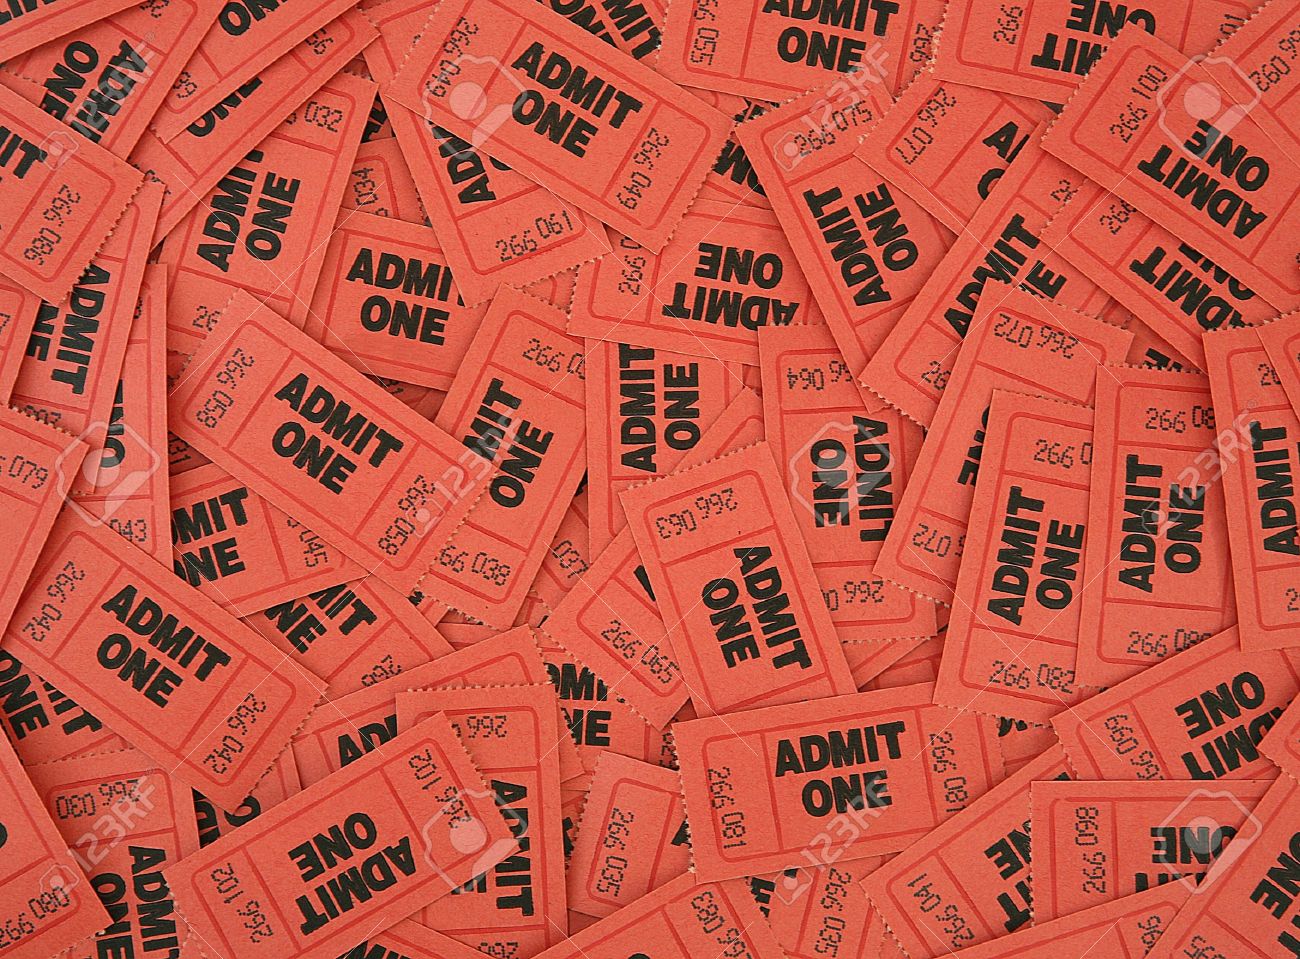 Admit One Ticket Background Stock Photo Picture And Royalty Free